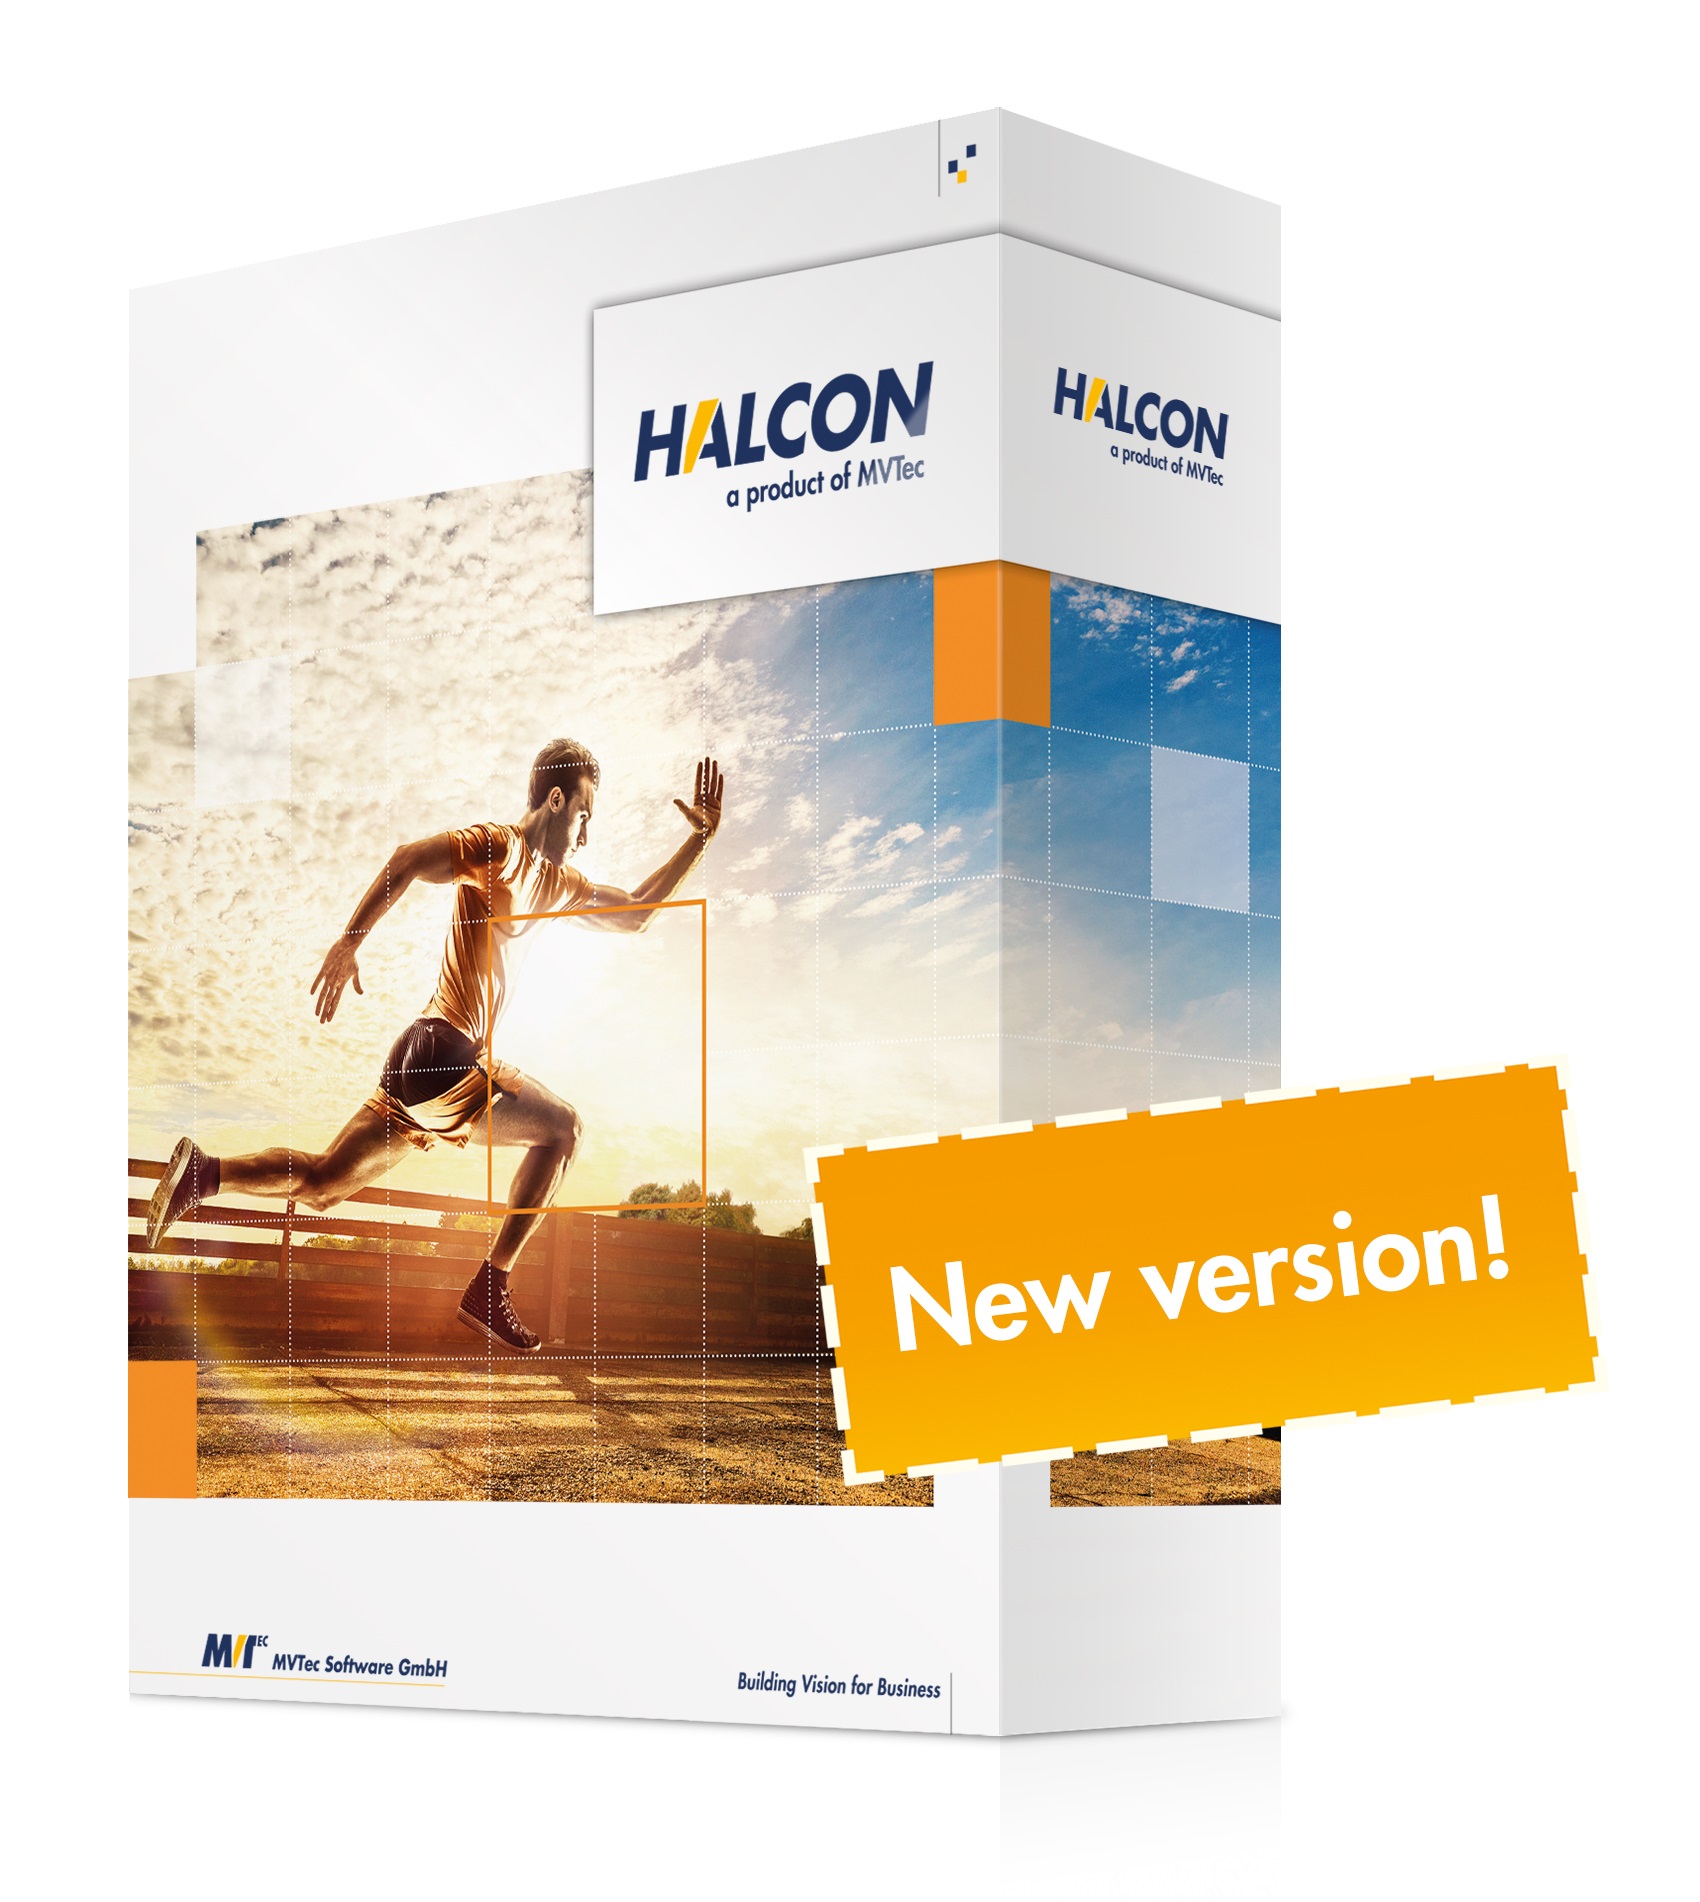 HALCON 18.05 will be available on May 22.